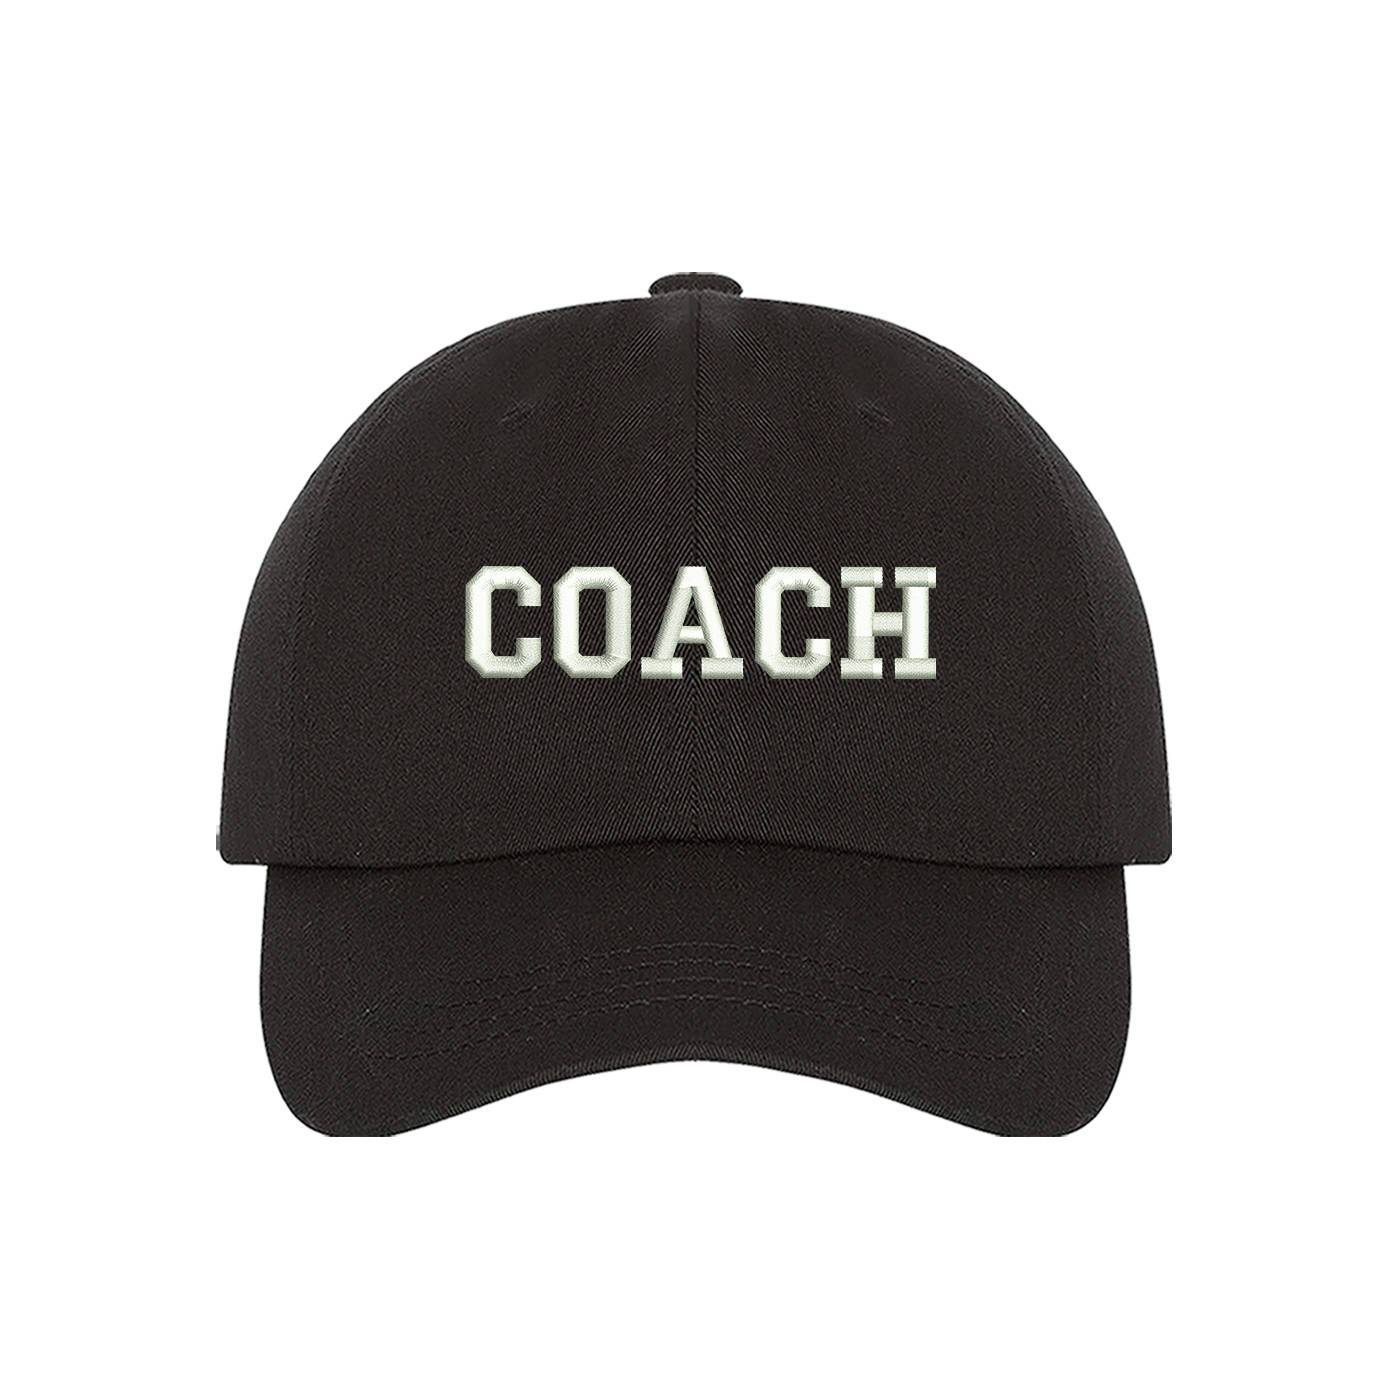 Black baseball hat embroidered with Coach - DSY Lifestyle